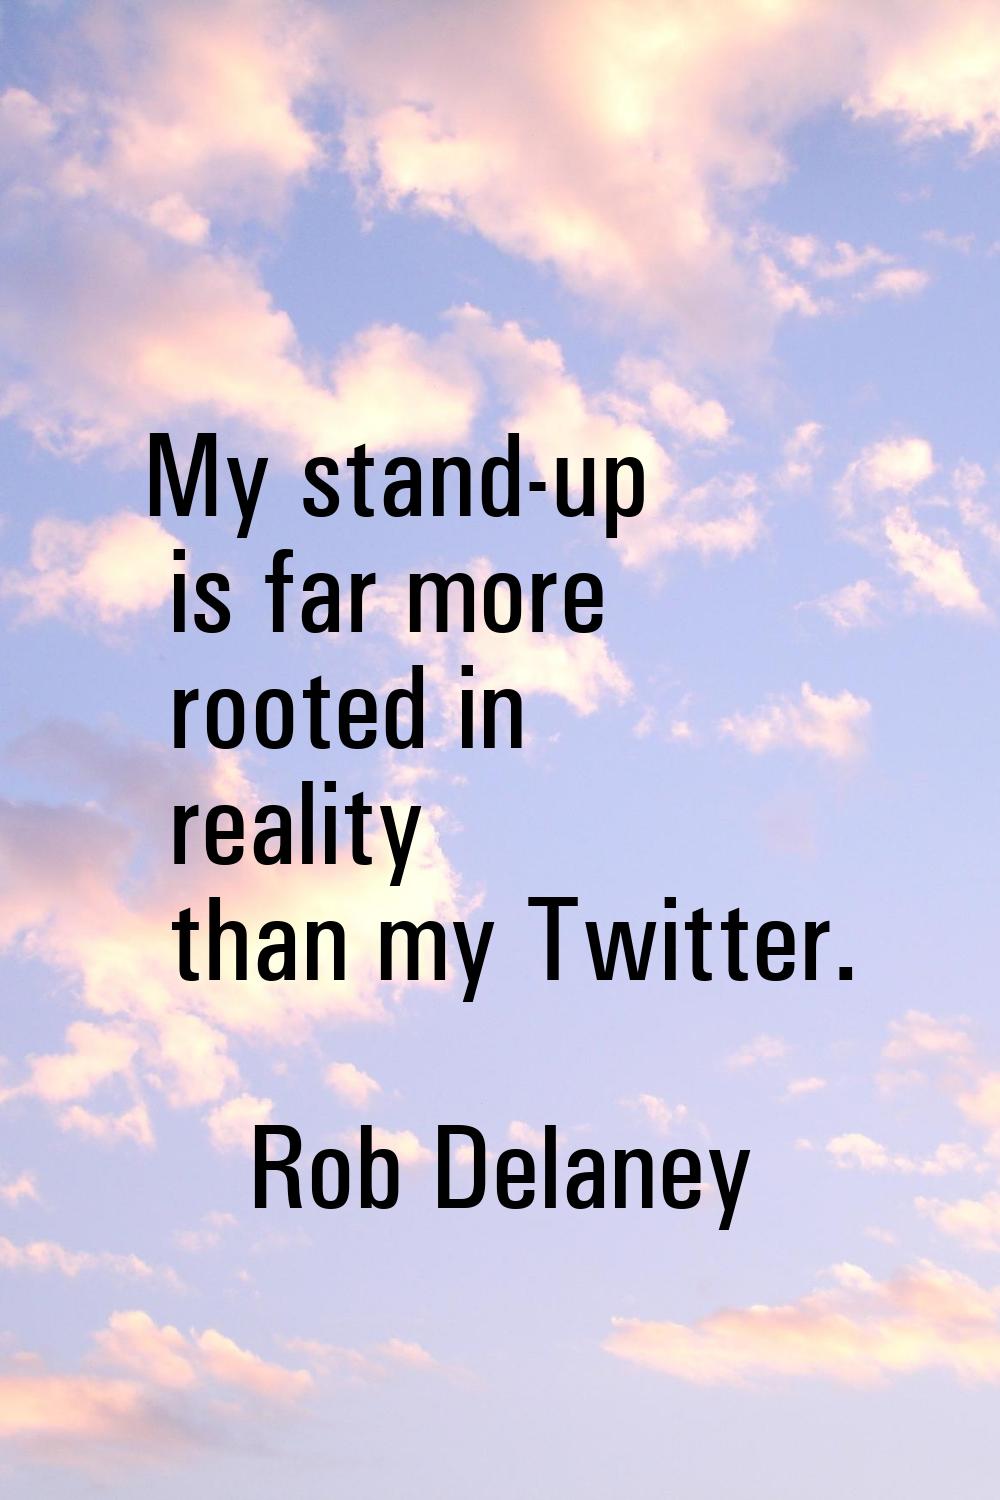 My stand-up is far more rooted in reality than my Twitter.